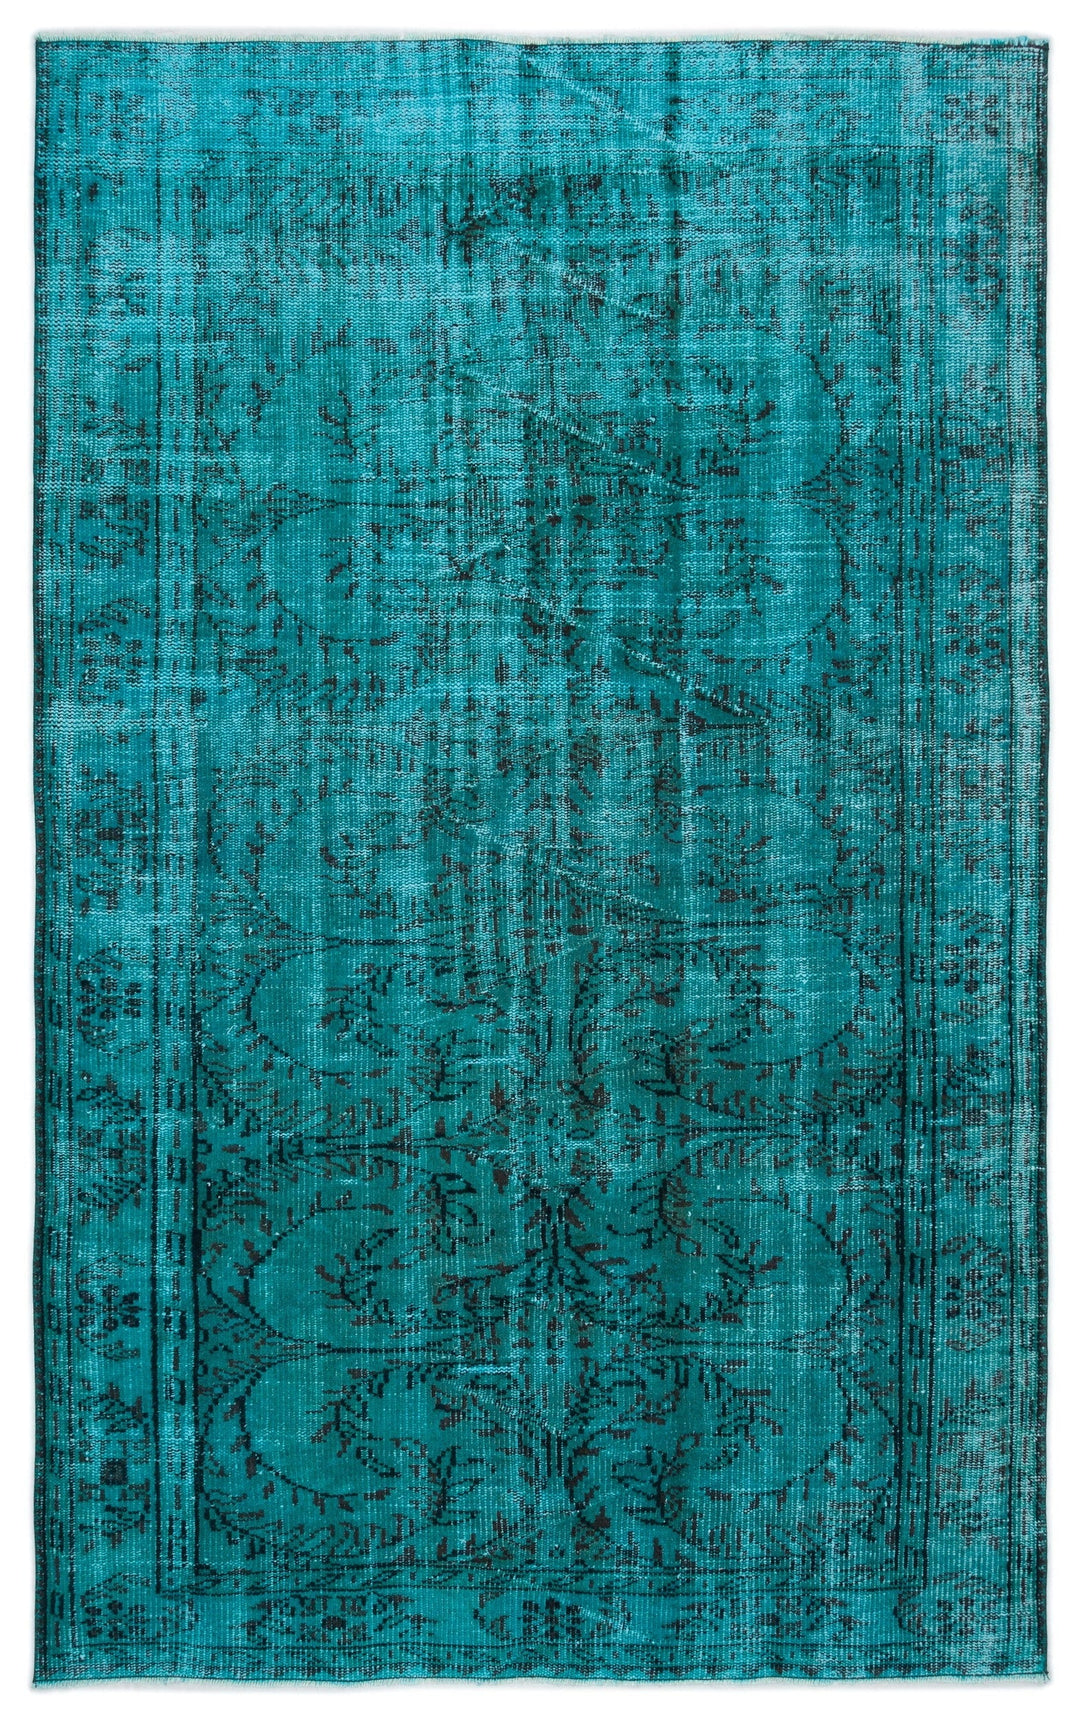 Athens Turquoise Tumbled Wool Hand Woven Carpet 169 x 257